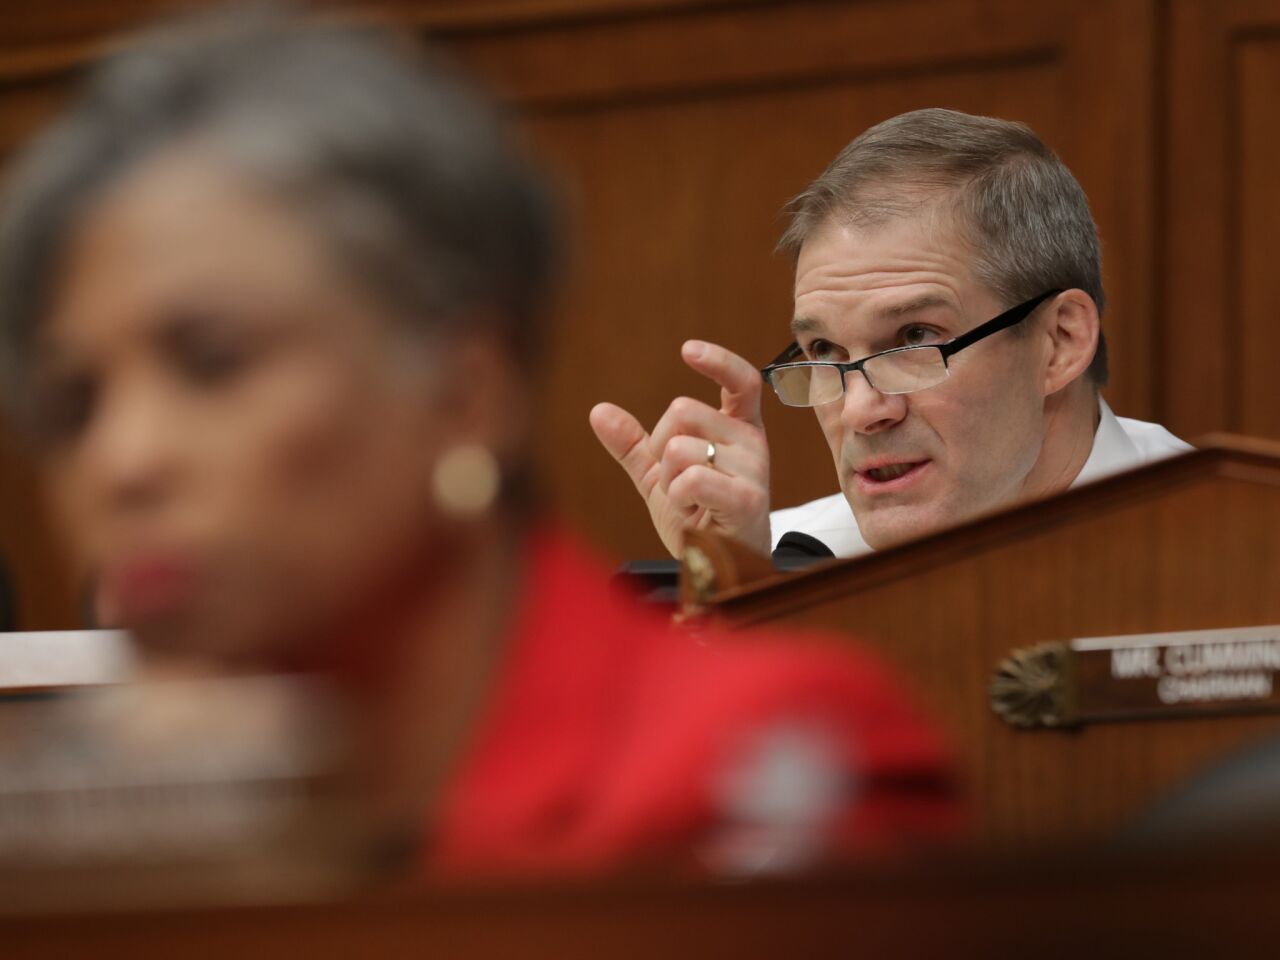 Rep. Jim Jordan (R-OH) questions Michael Cohen as he testifies before the House Oversight Committee on Capitol Hill in Washington, DC.